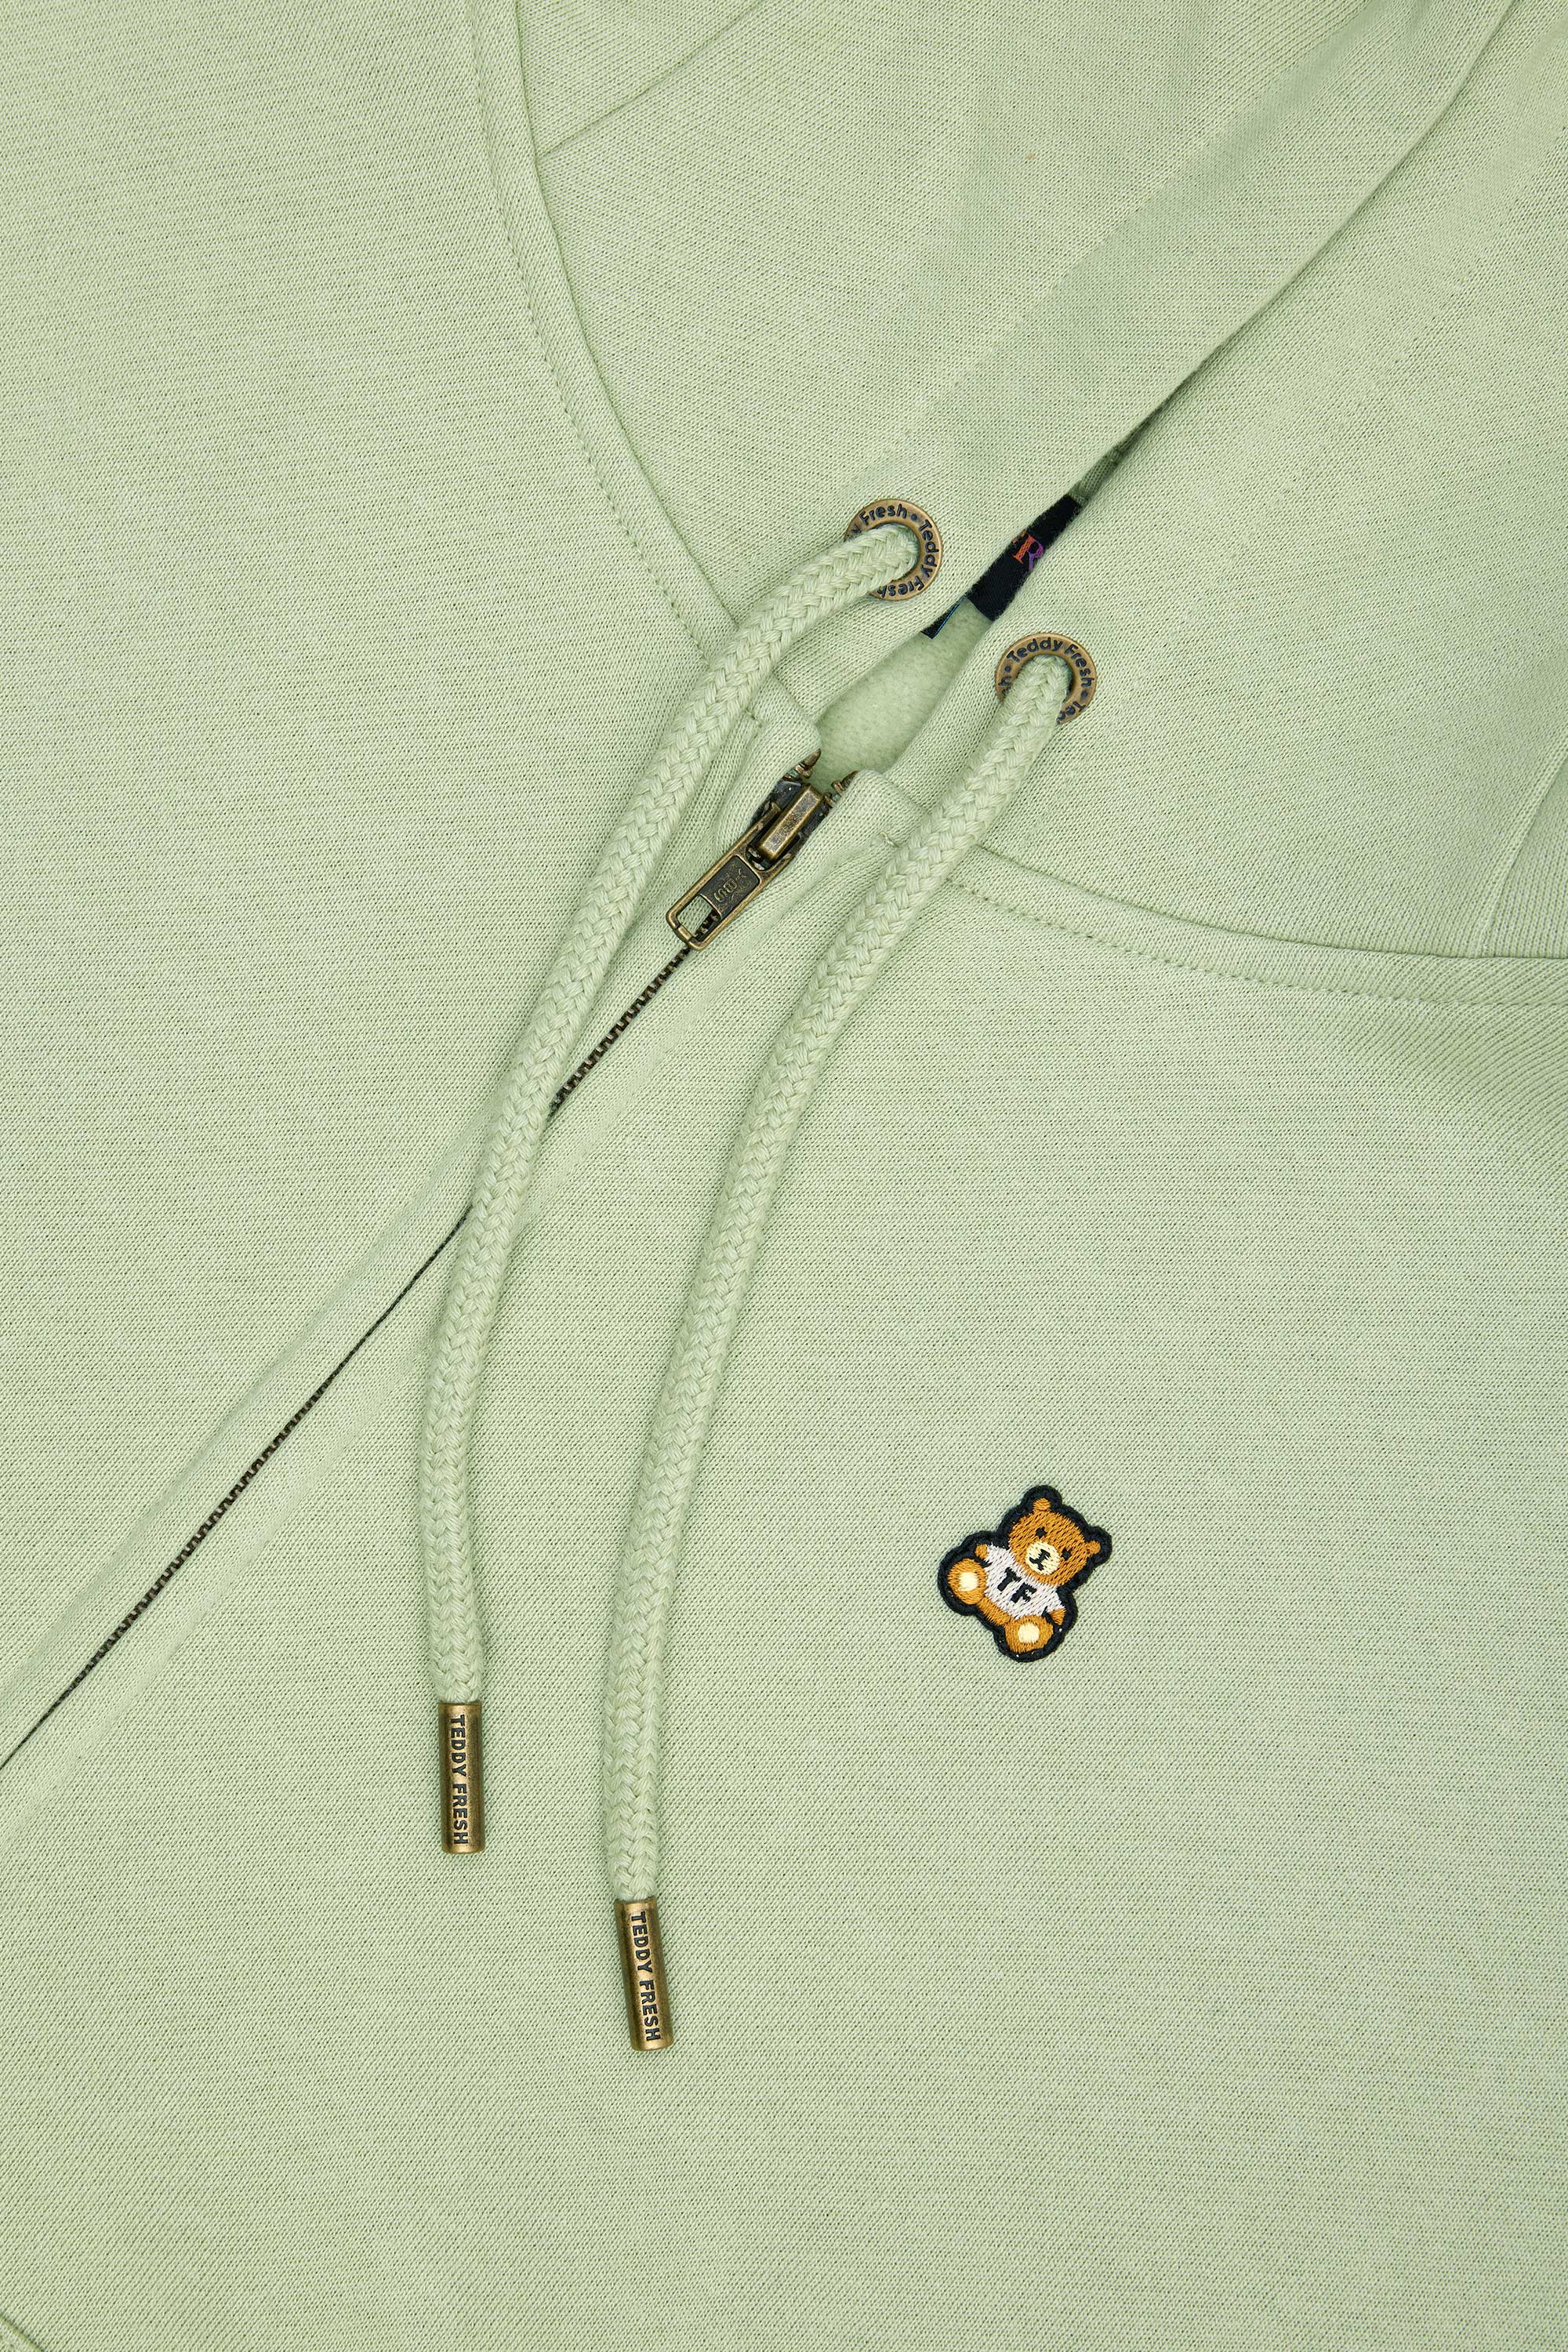 Teddy Fresh on X: Stay warm in our colorful women's Quilted Zip Hoodie and  Sweatpants. This set features an all over print, soft jersey lining, and  our iconic bear batch embroidered at